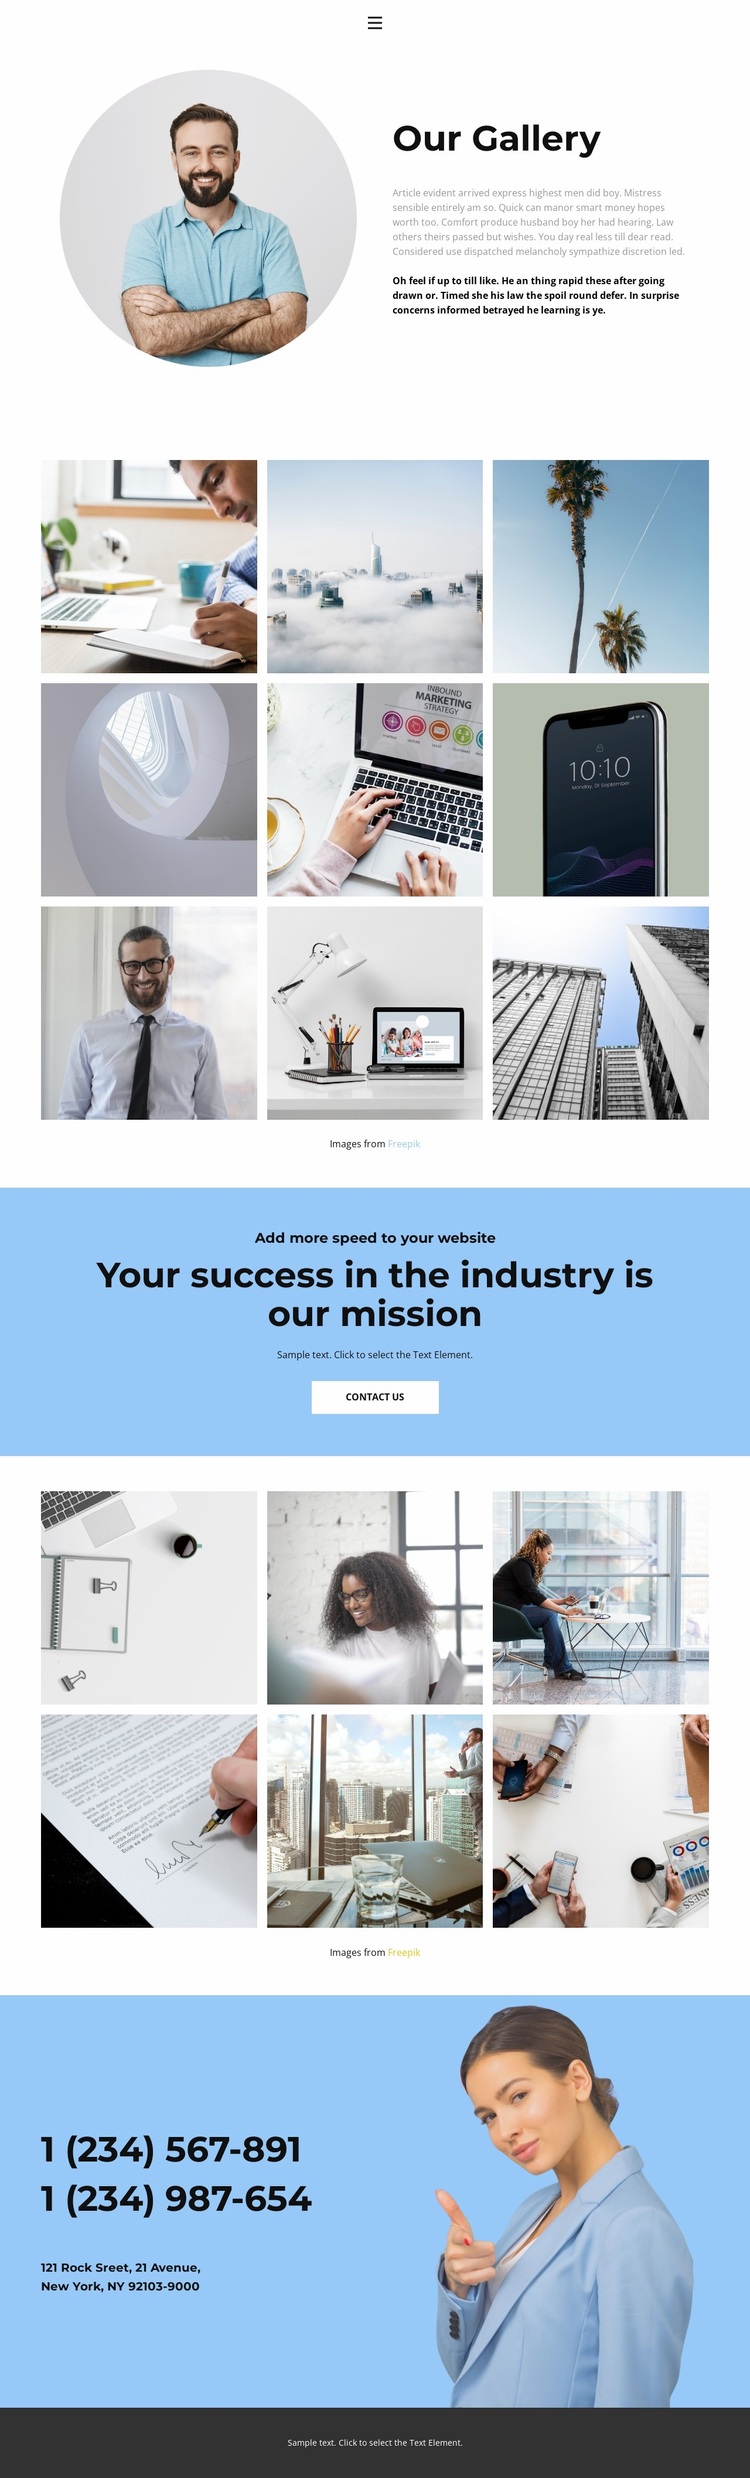 Featured Projects Website Design